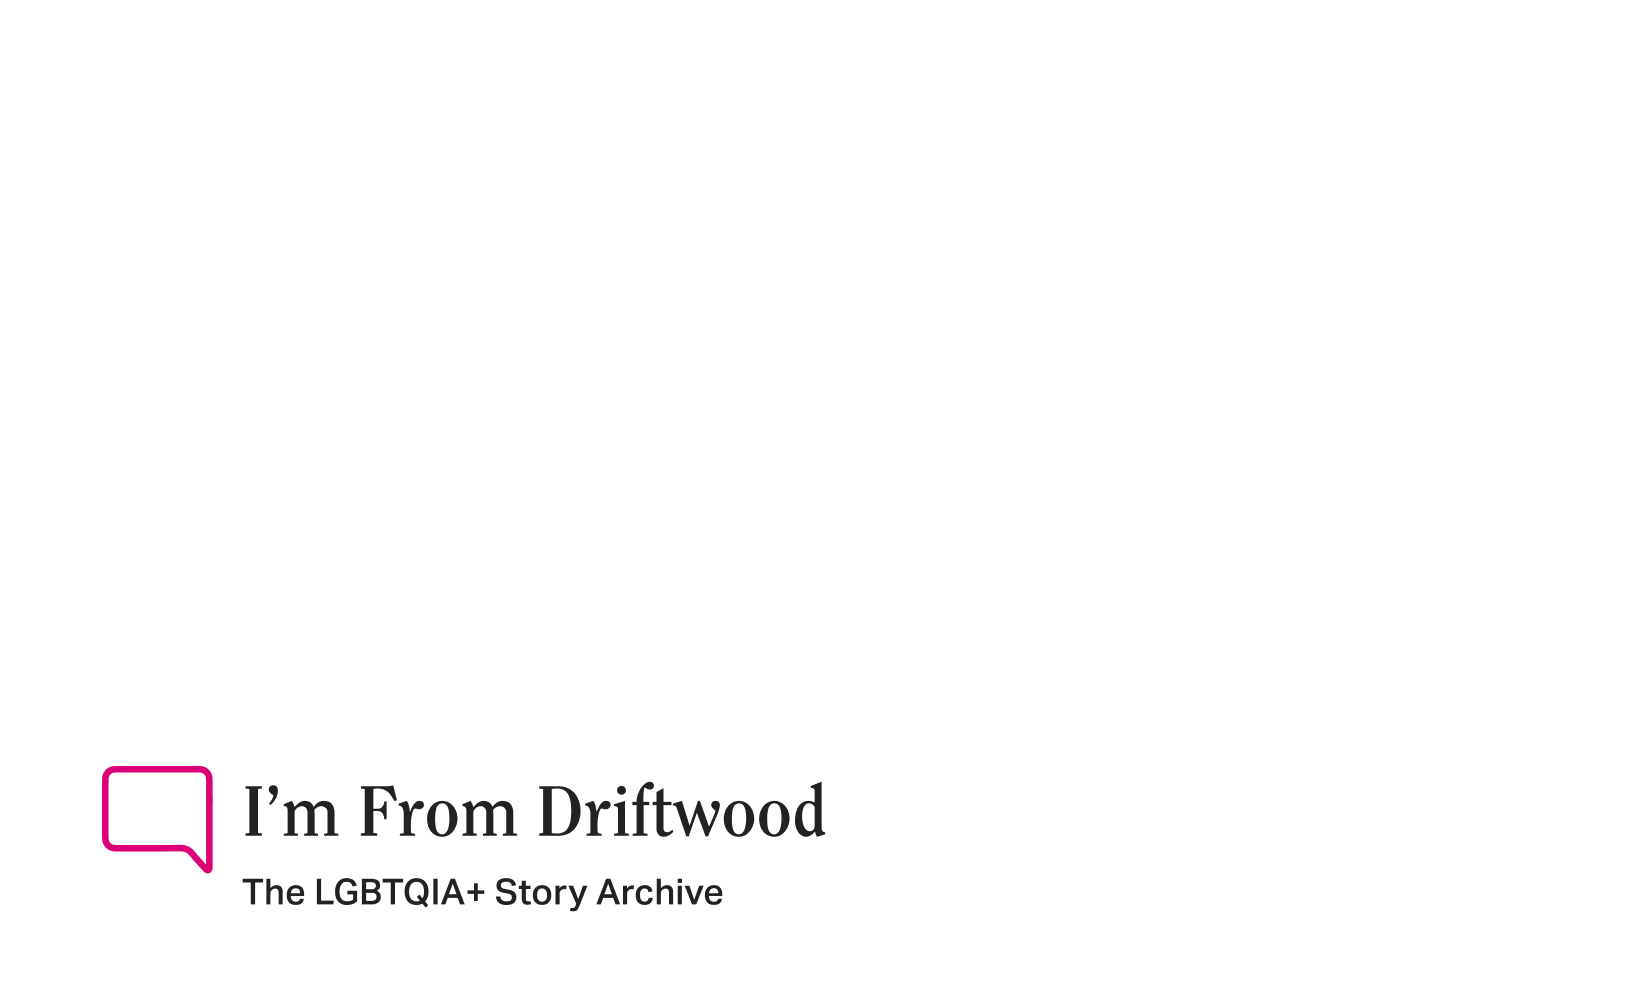 AIDS LifeCycle + I’m From Driftwood